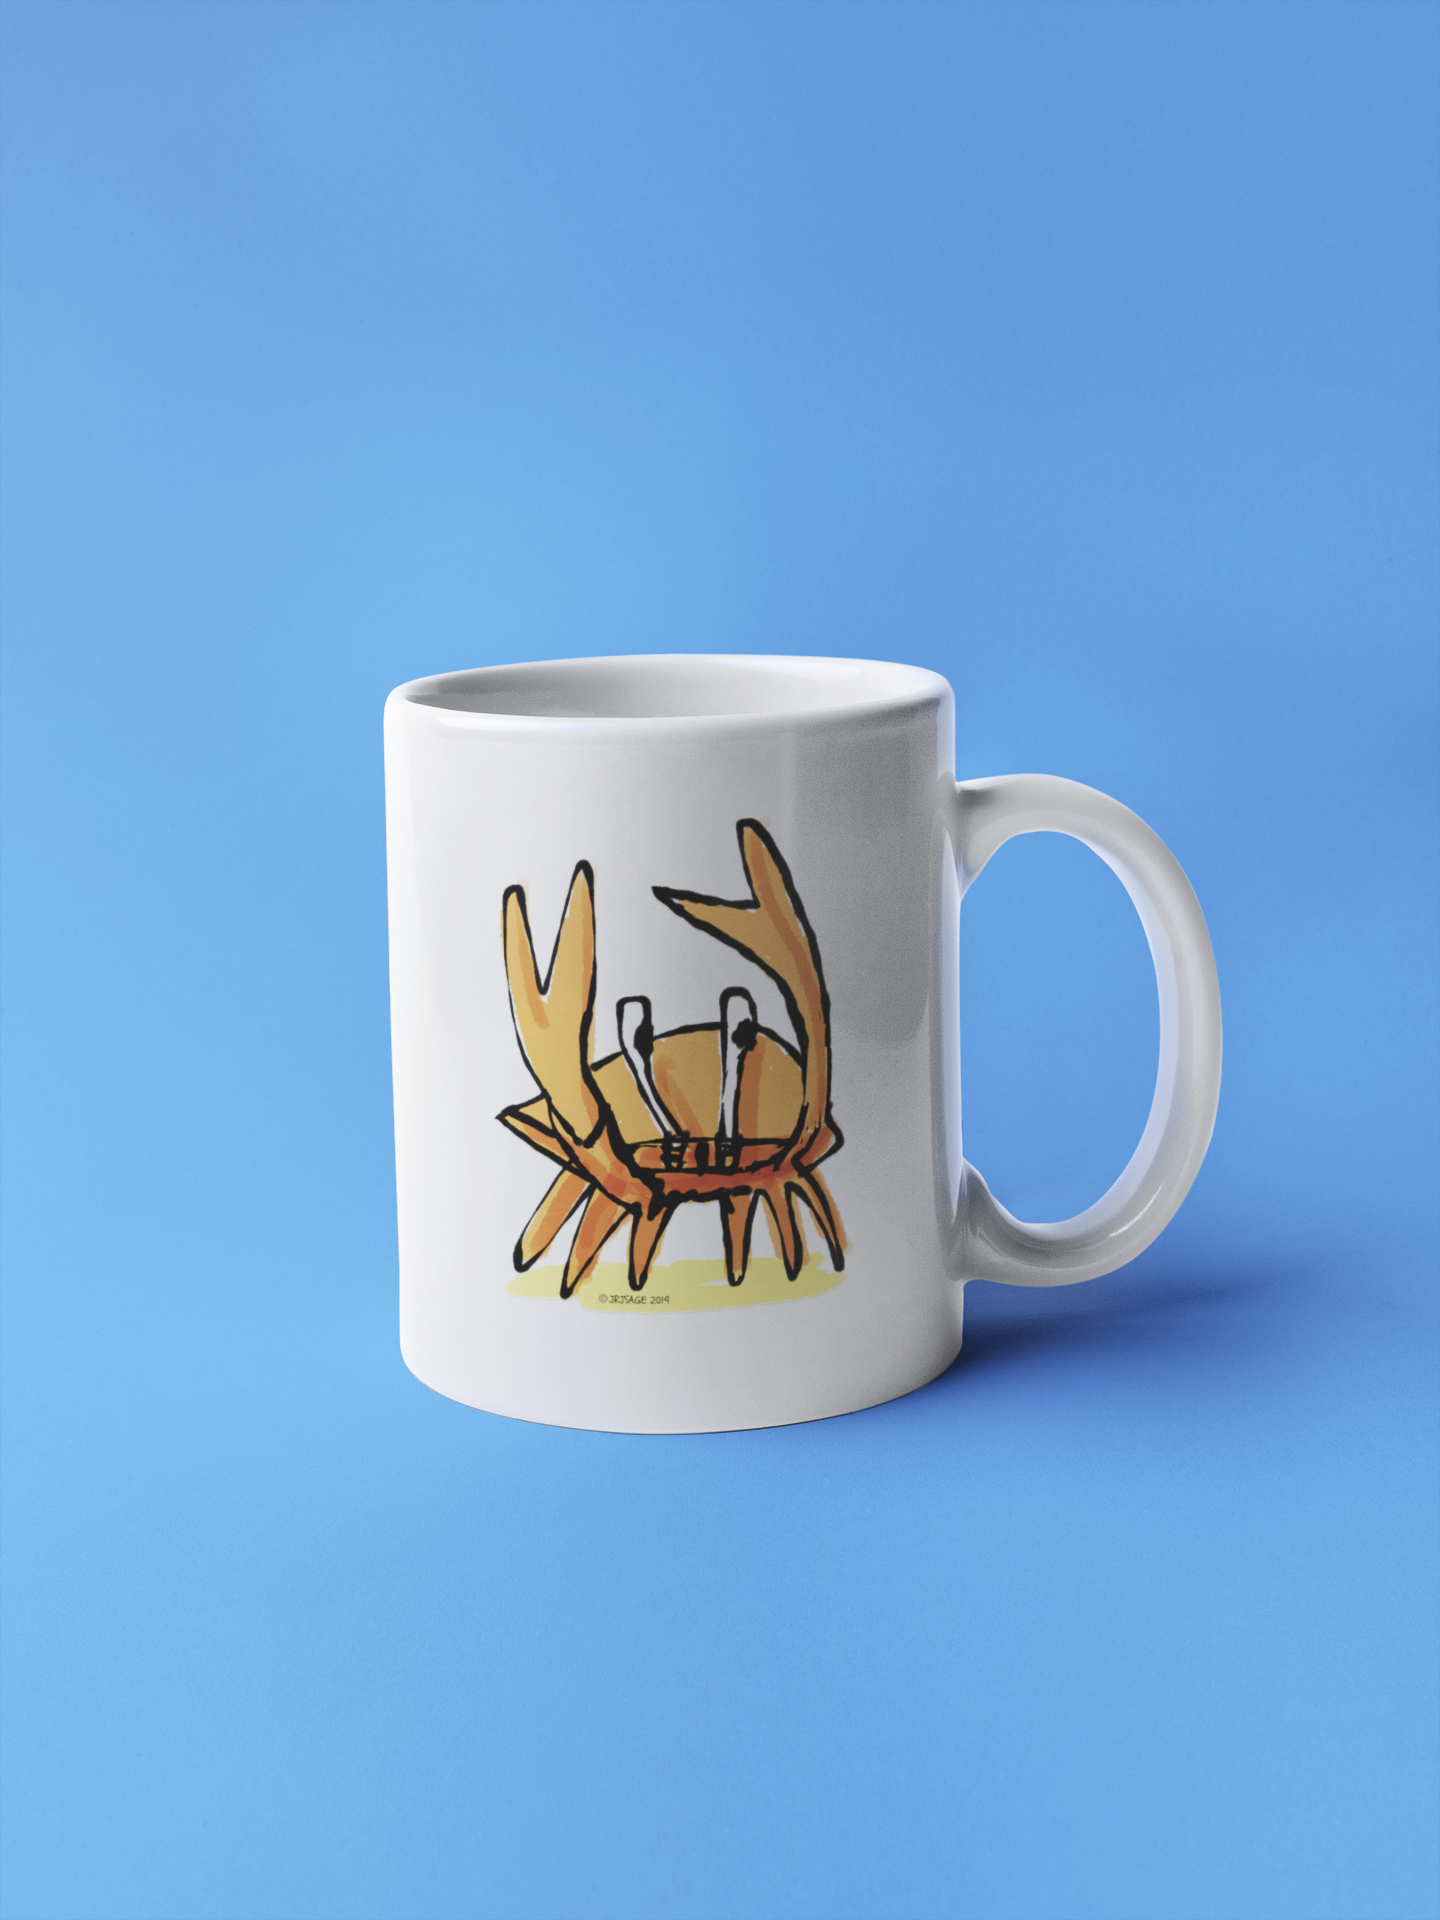 An Angry Crab illustration on a White Ceramic Hector and Bone Mug